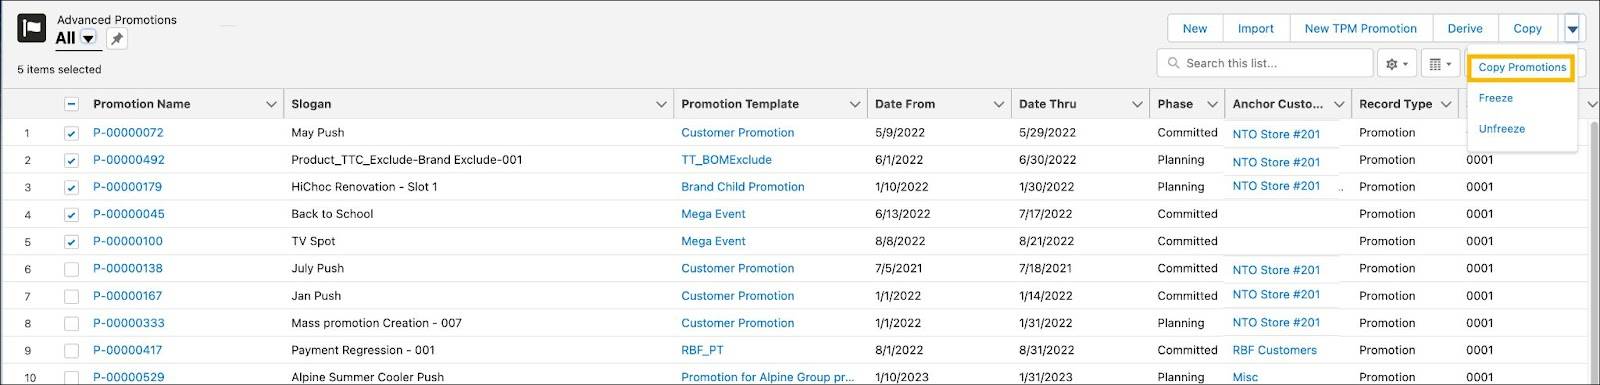 The Advanced Promotions page showing the options to copy promotions.